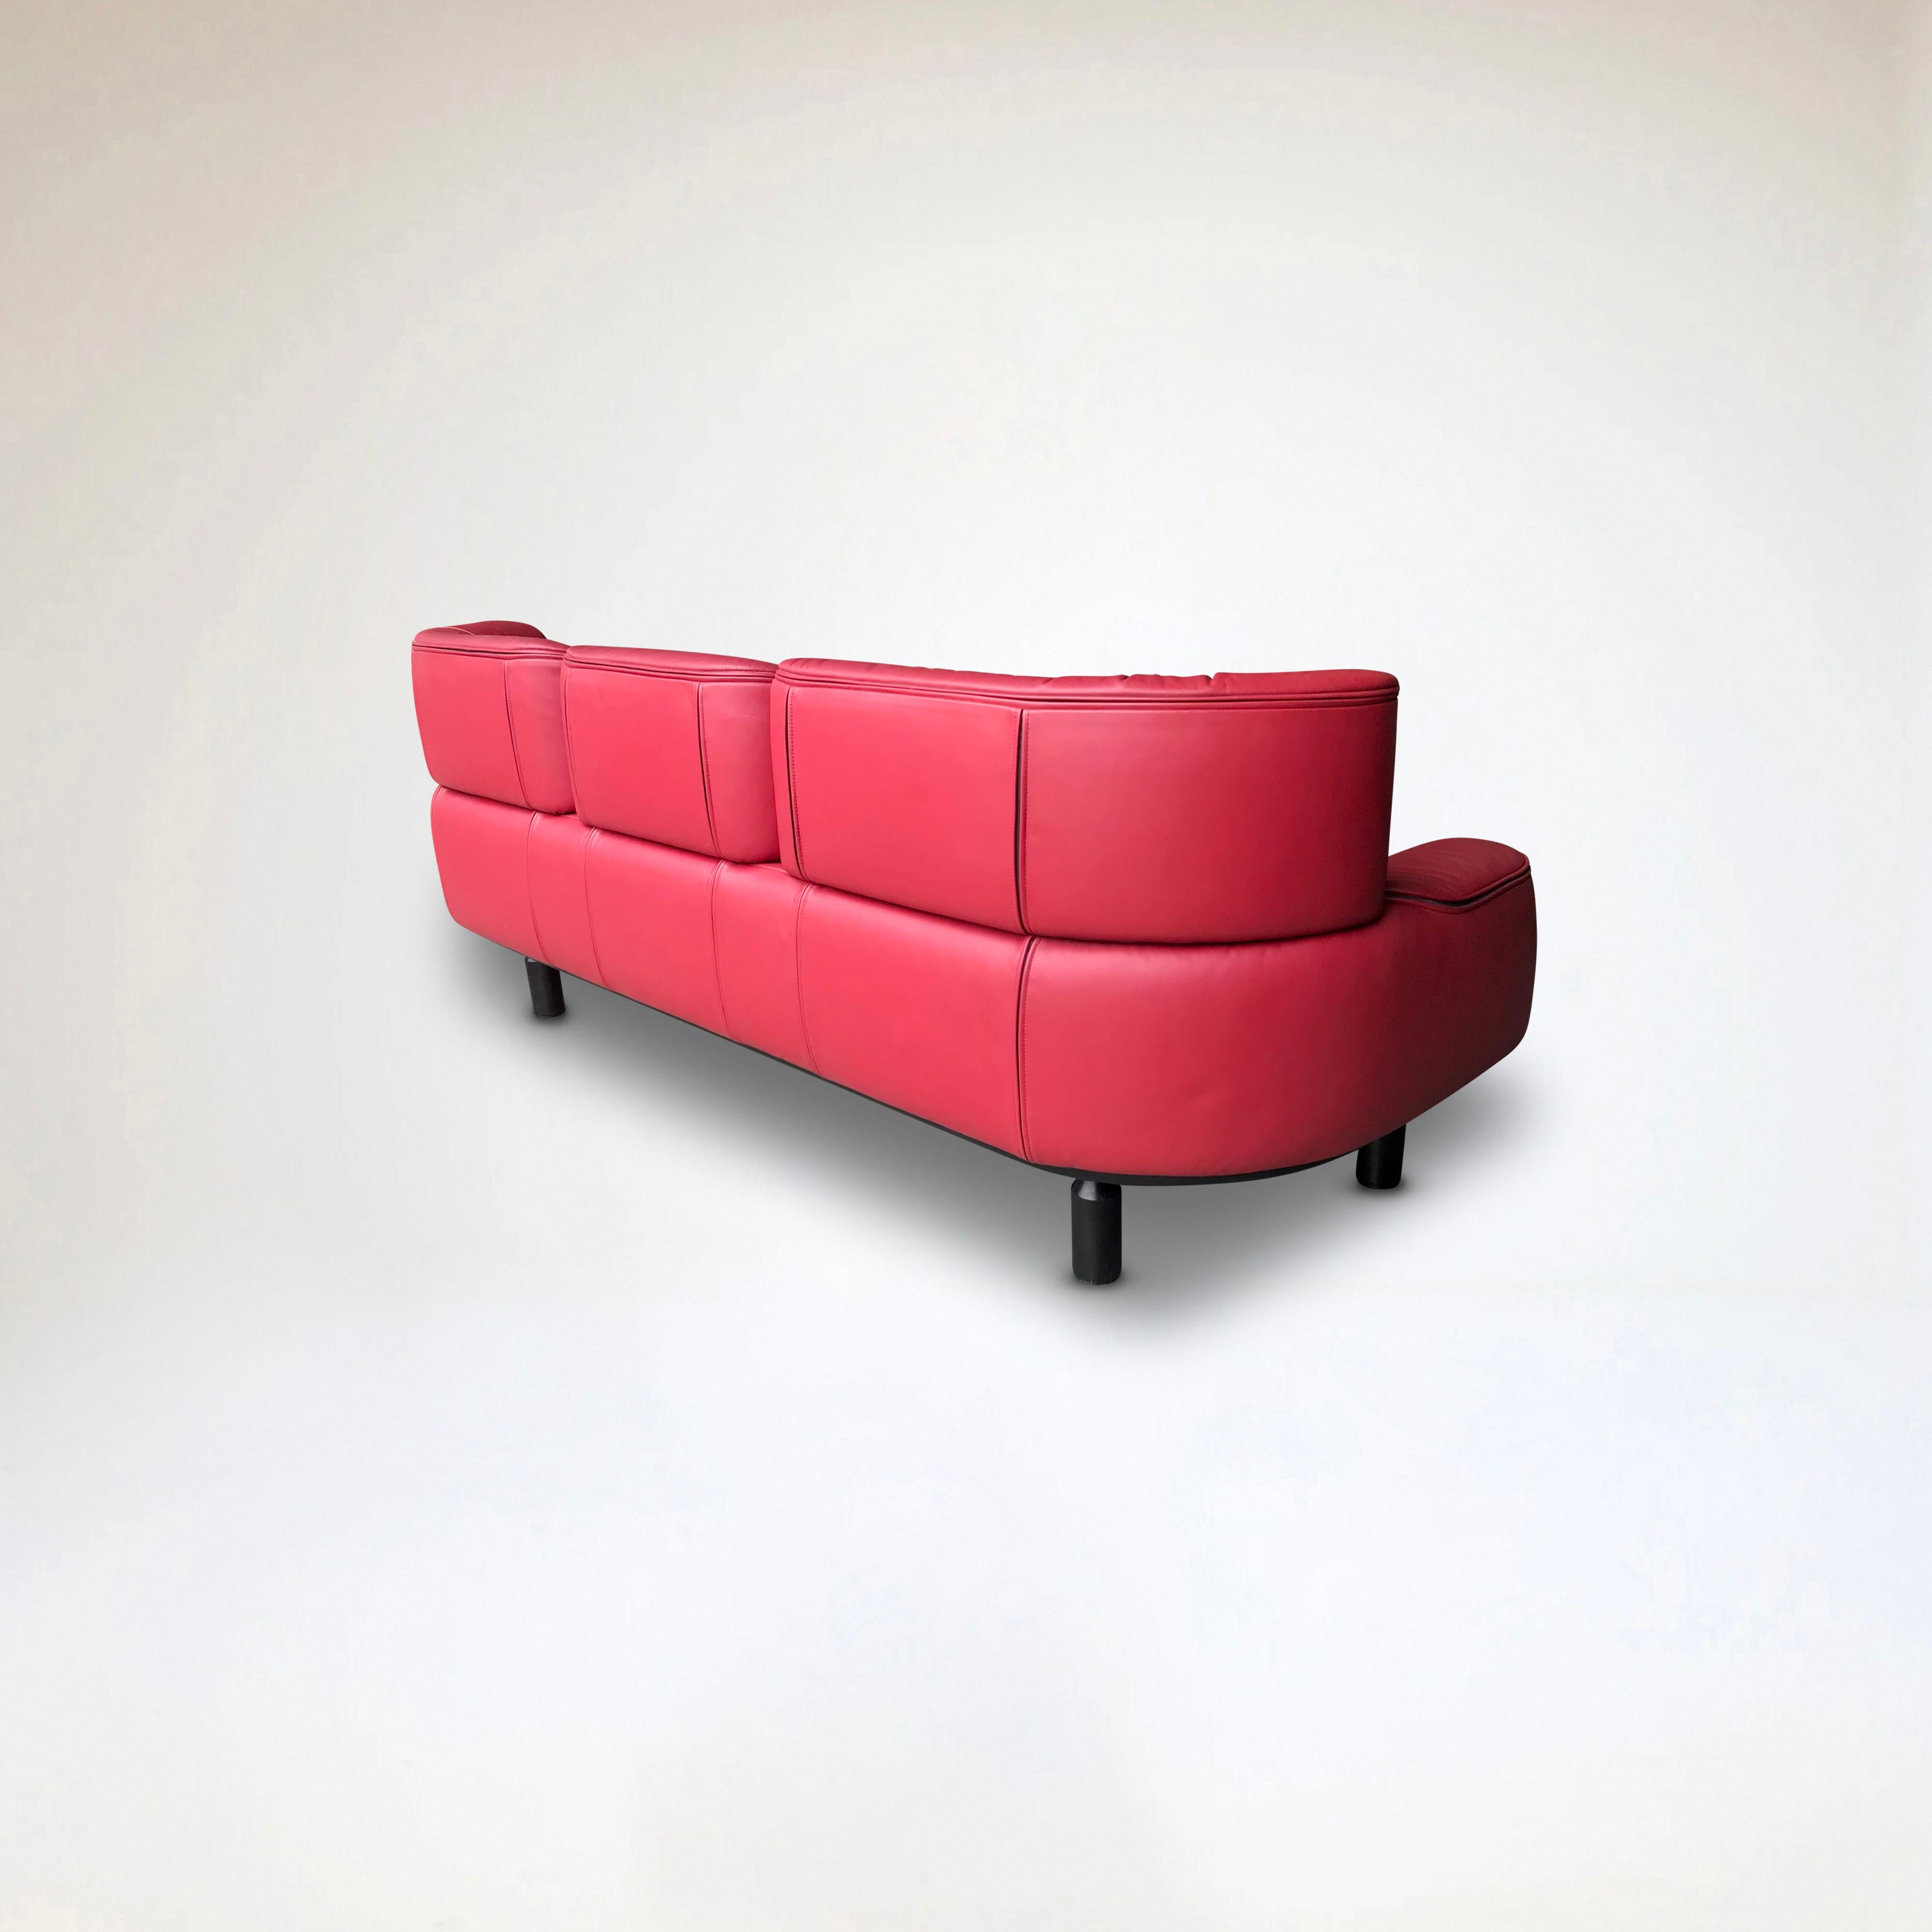 Bull 3-seater red leather sofa by Gianfranco Frattini for Cassina 1987 For Sale 8